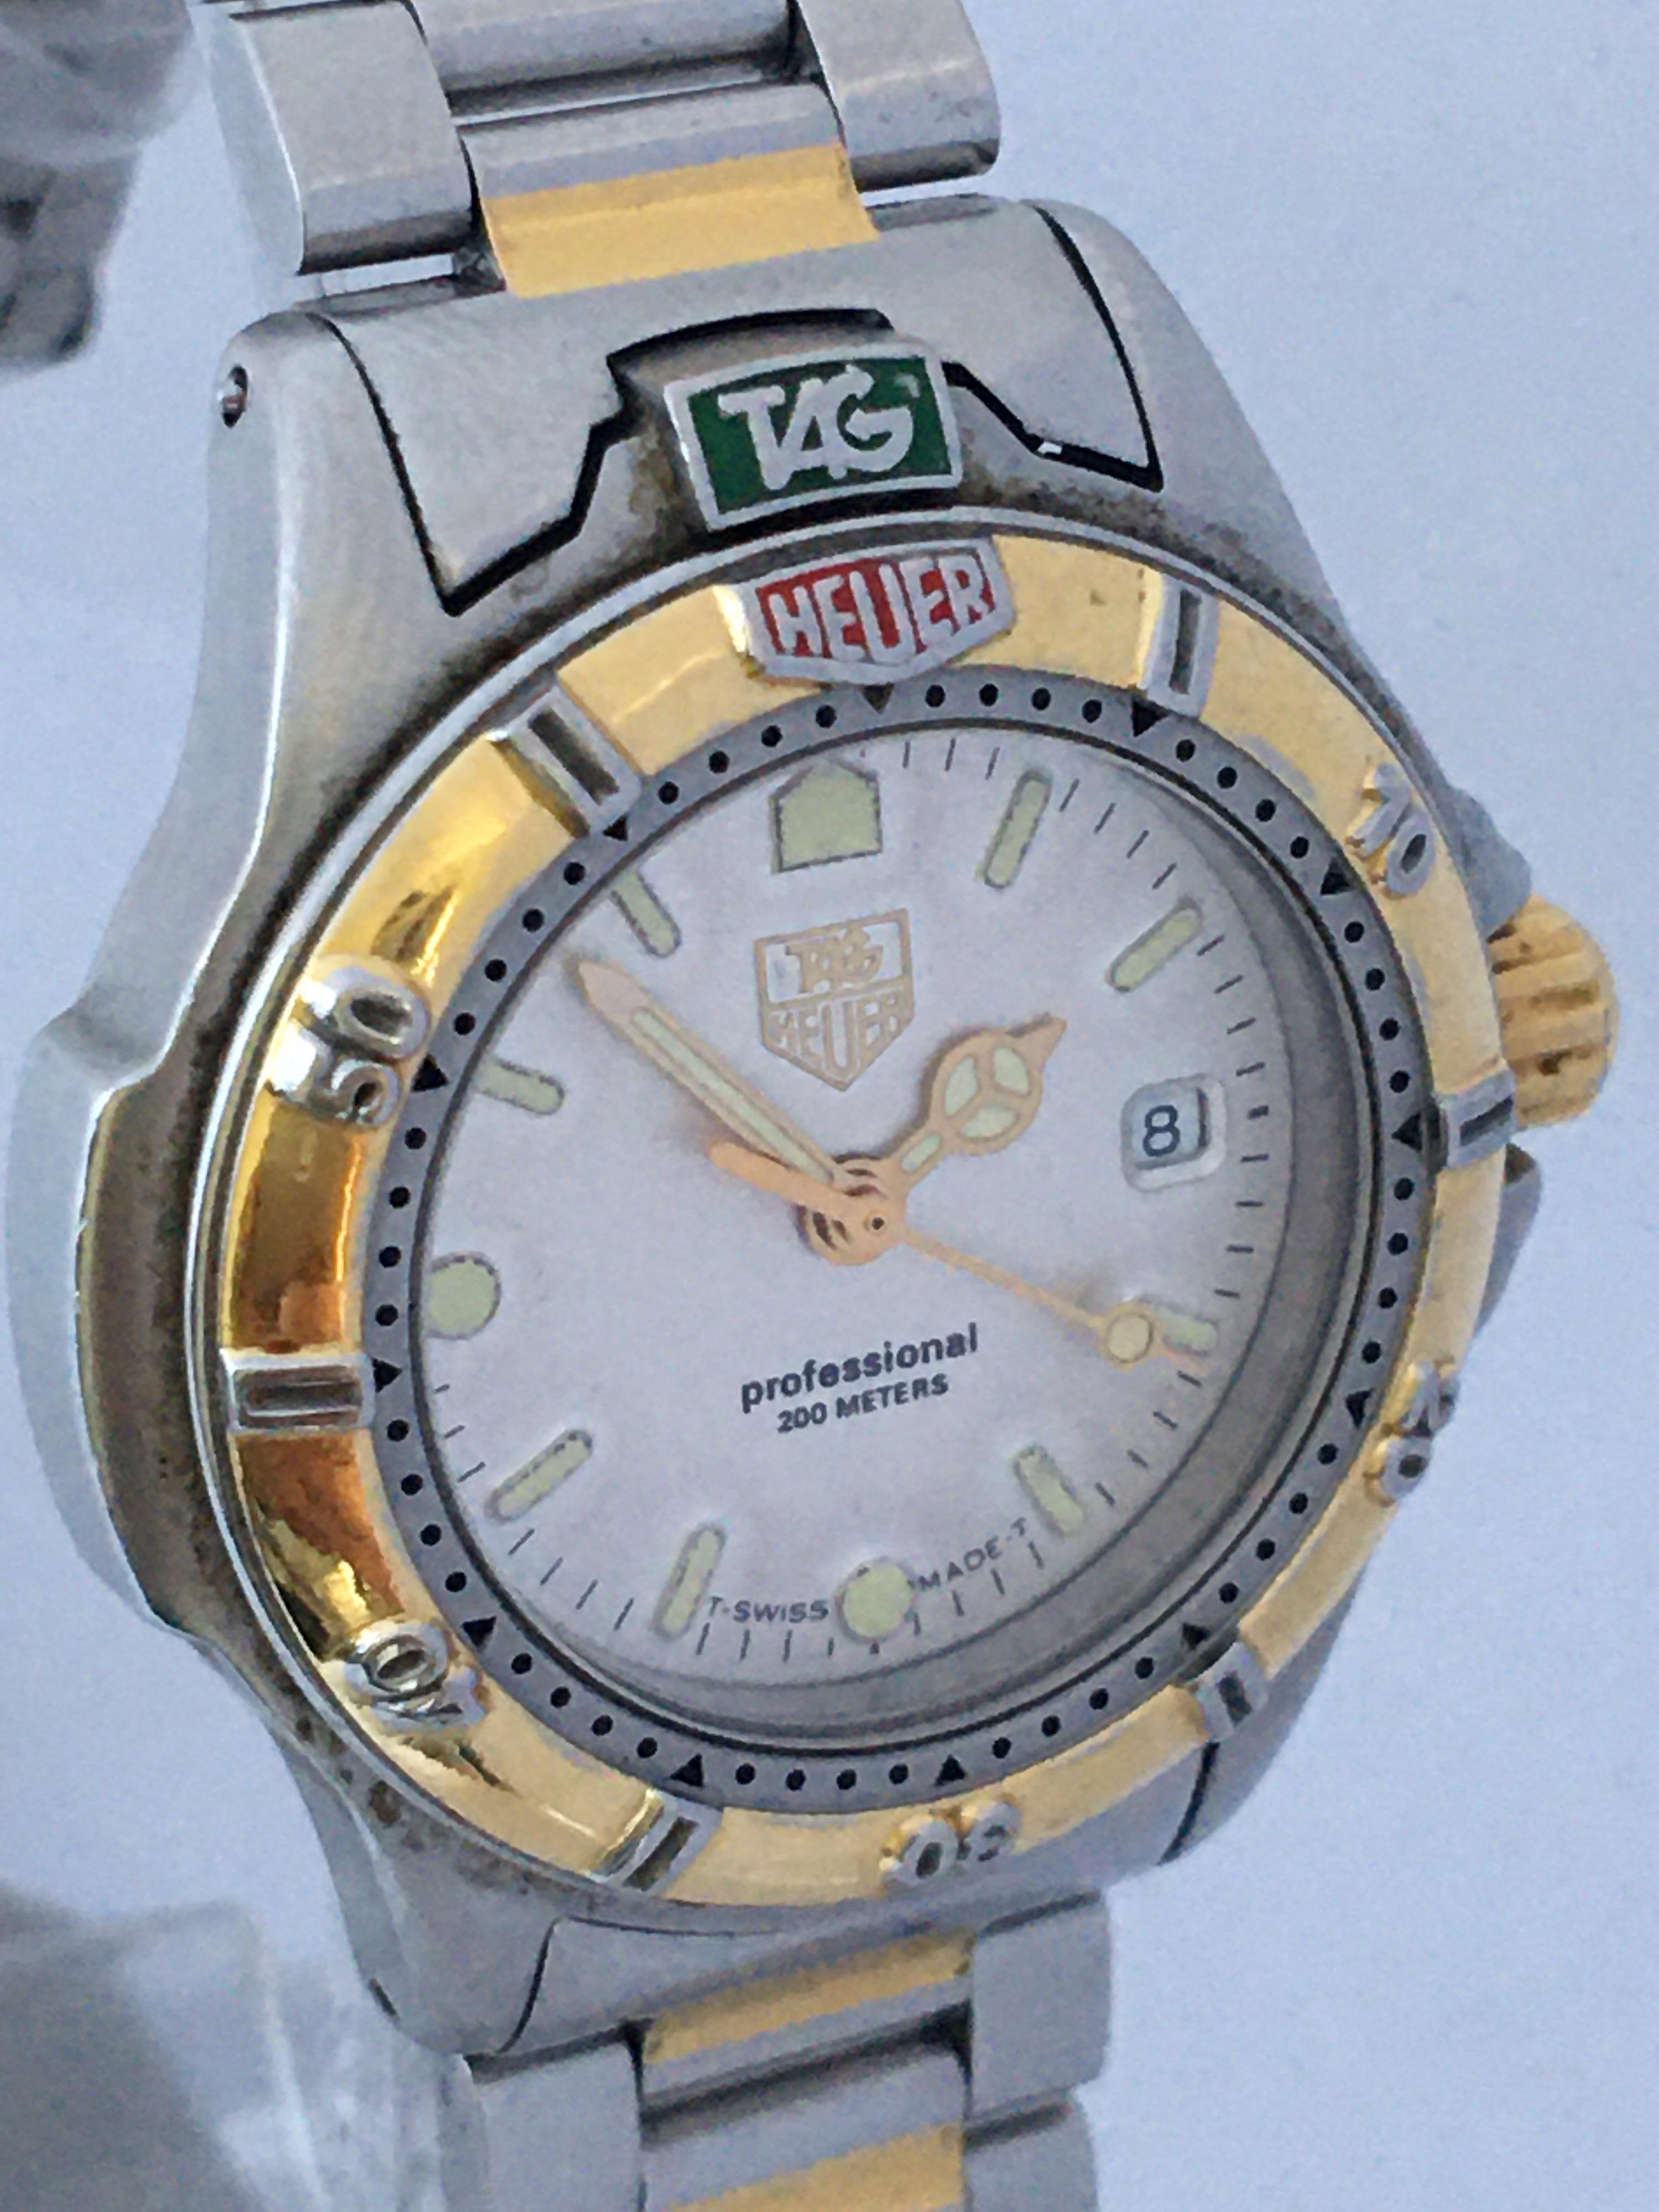 tag heuer professional 200 meters gold